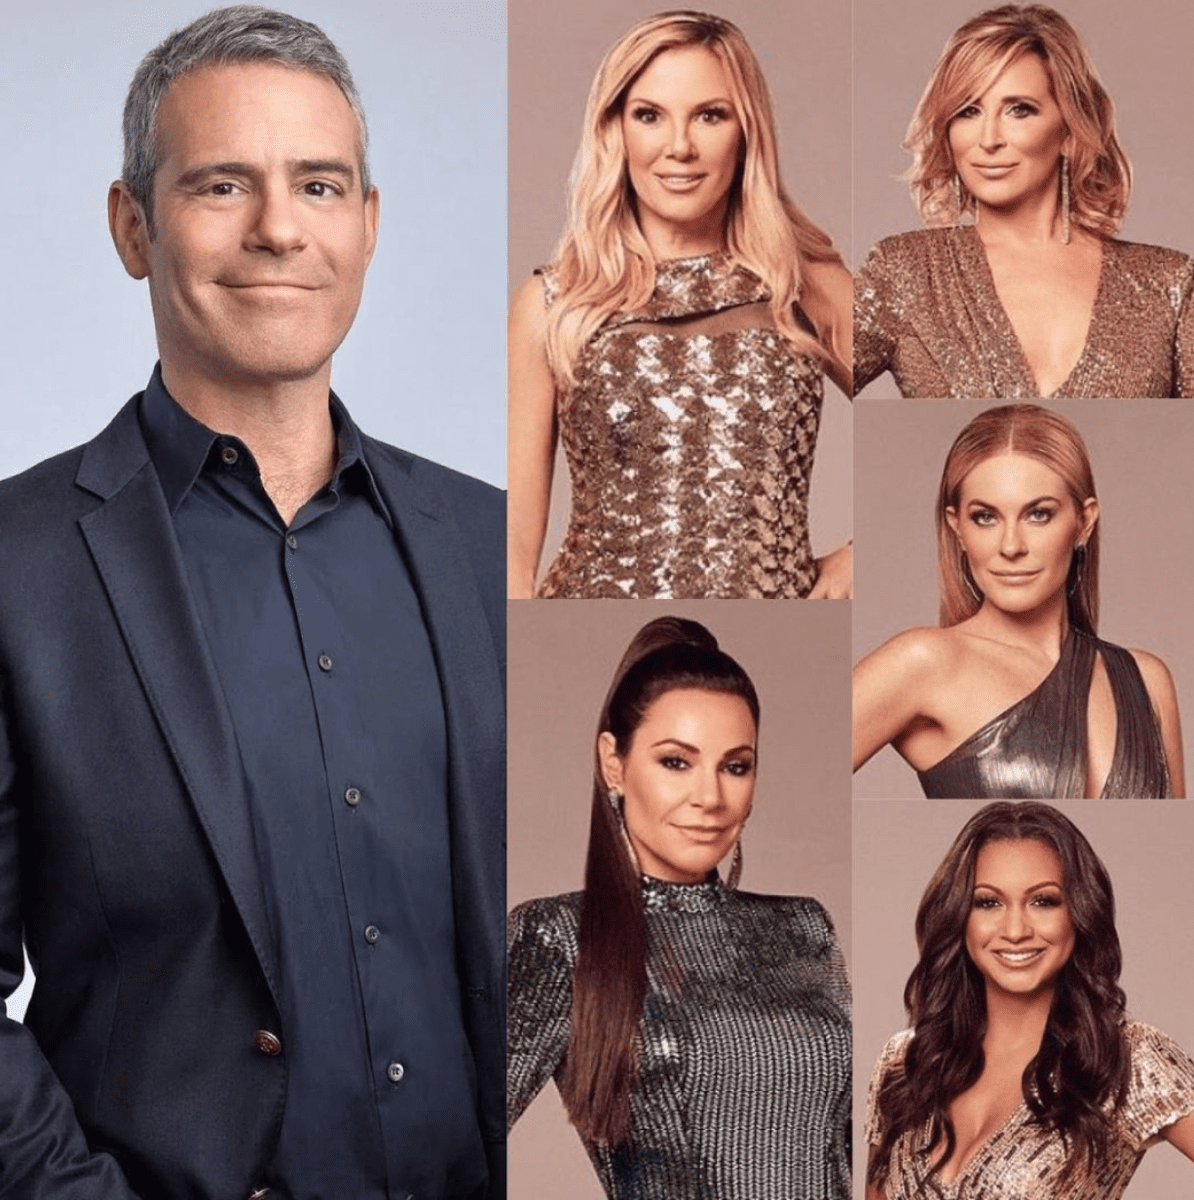 RHONY Producers Having Zero Luck Finding 'Diverse' Cast For RHONY